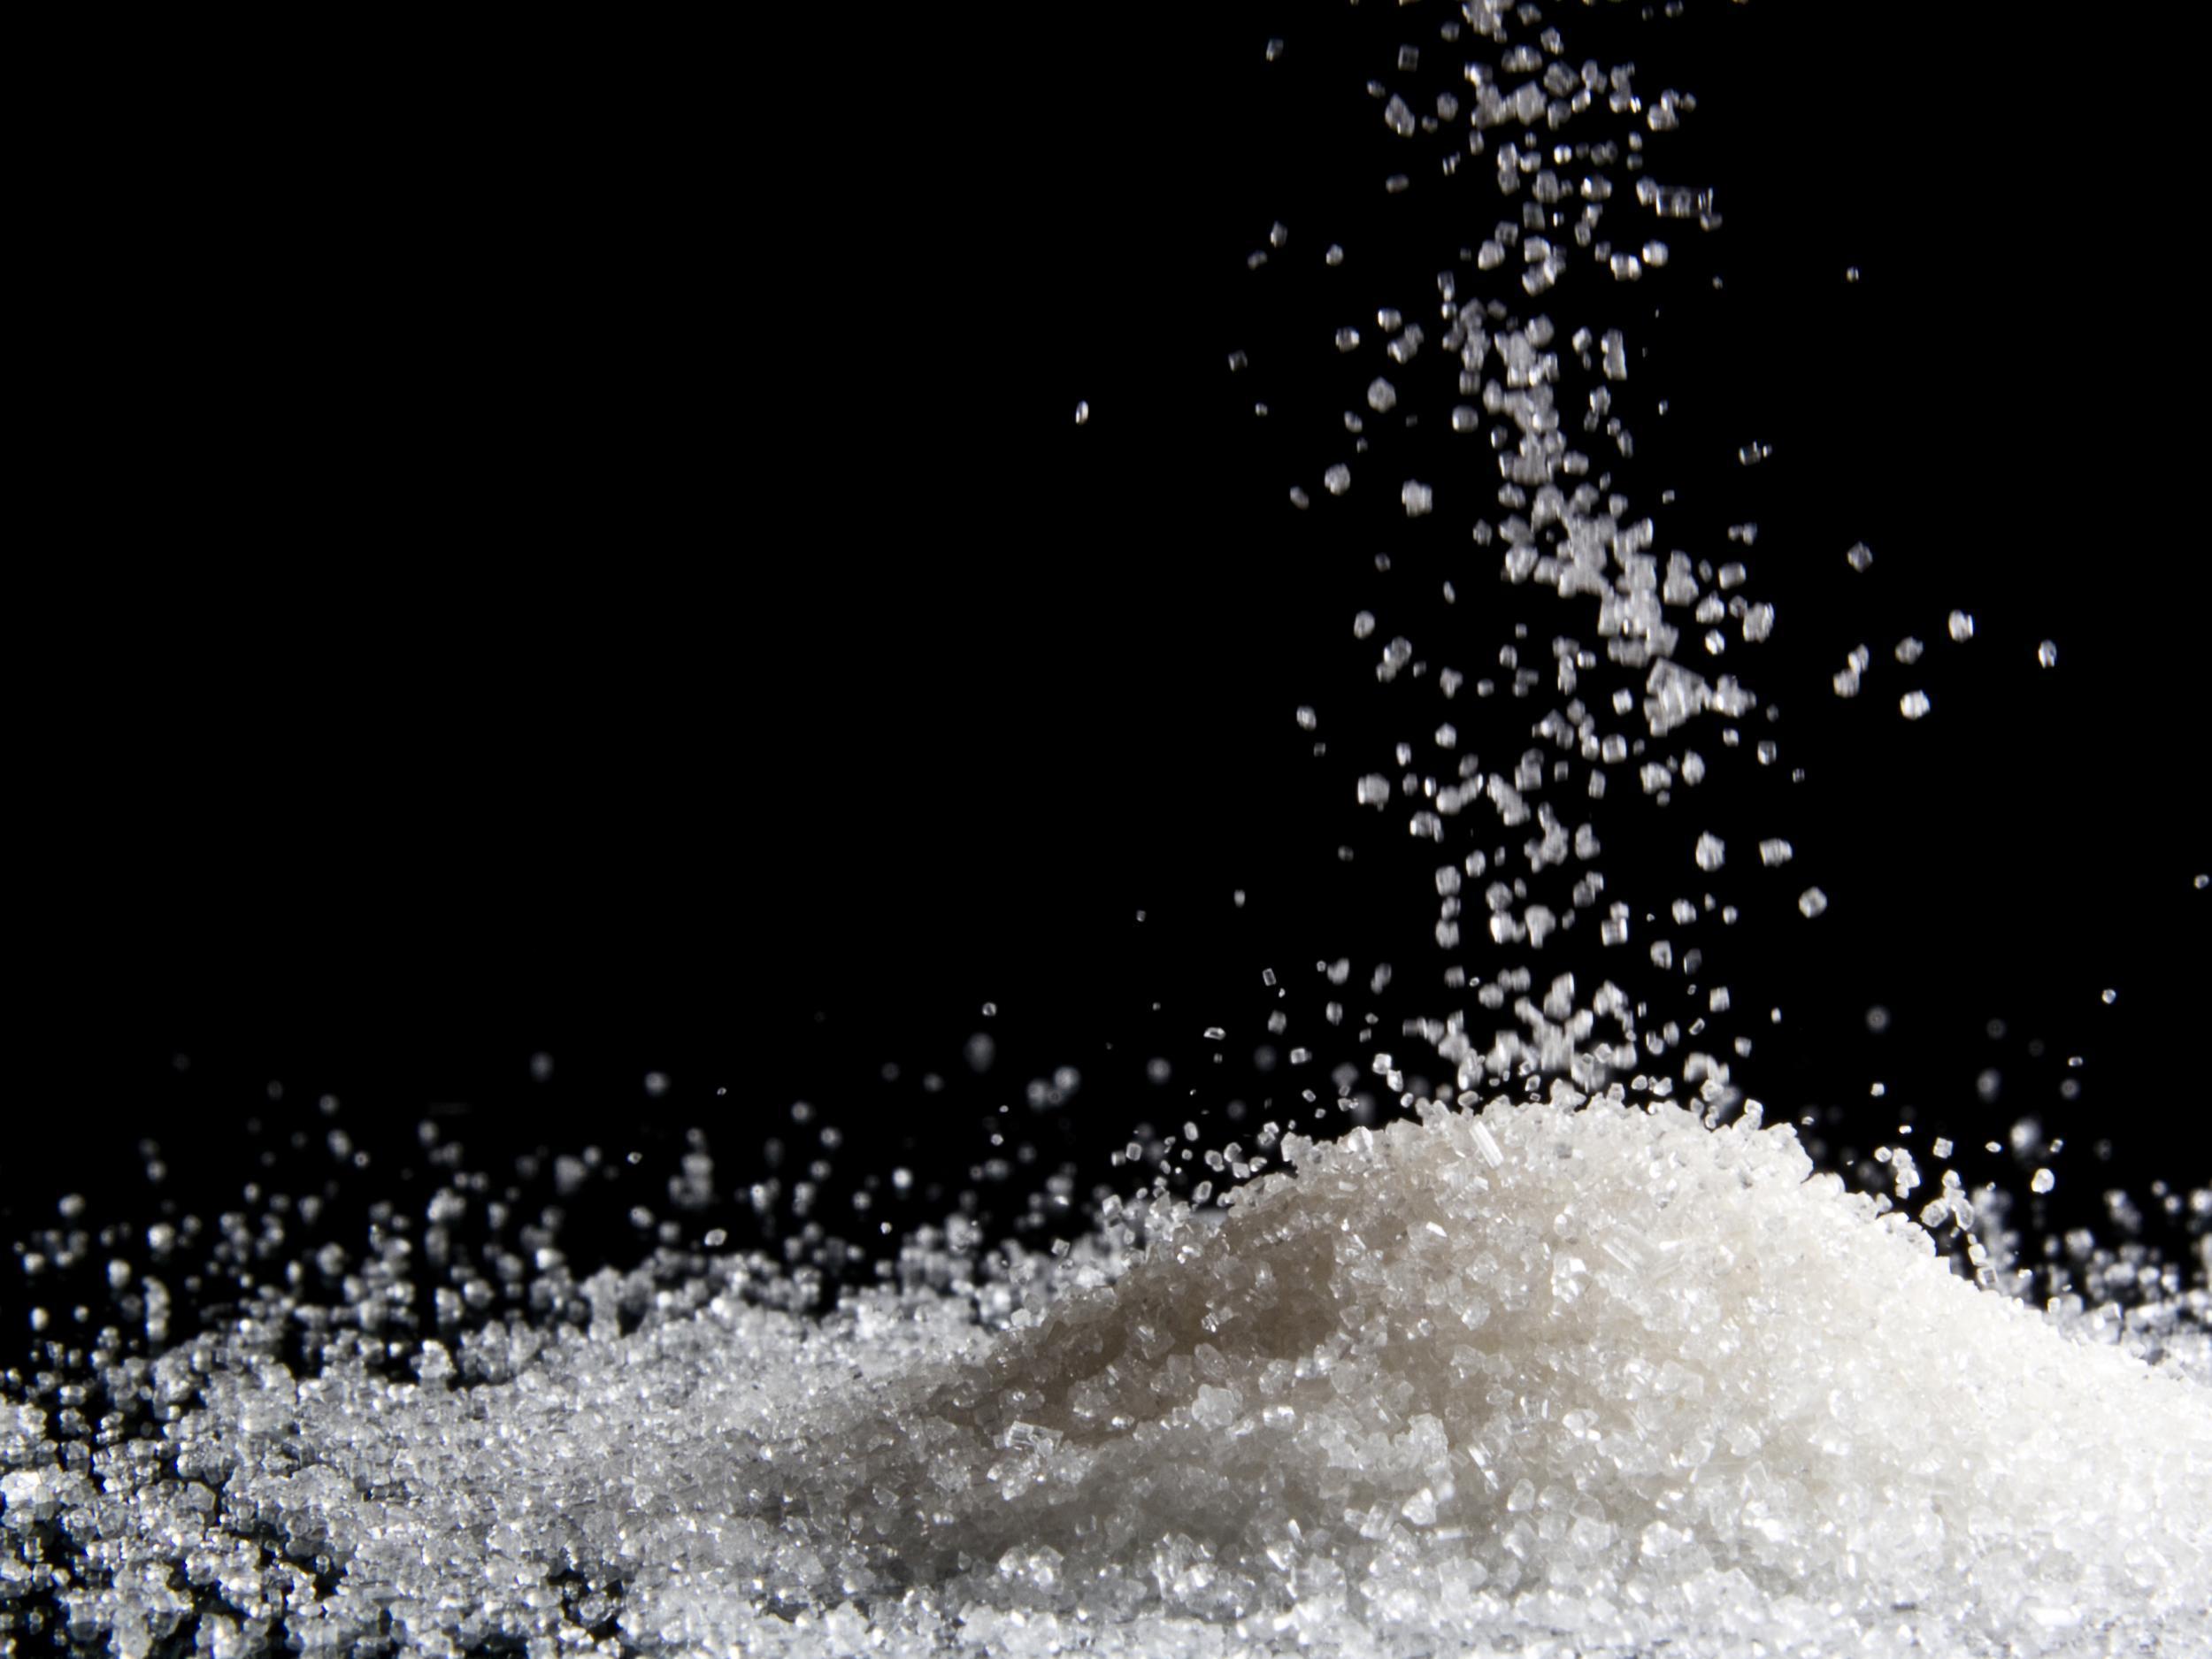 The research misled people about the dangers of sugar consumption